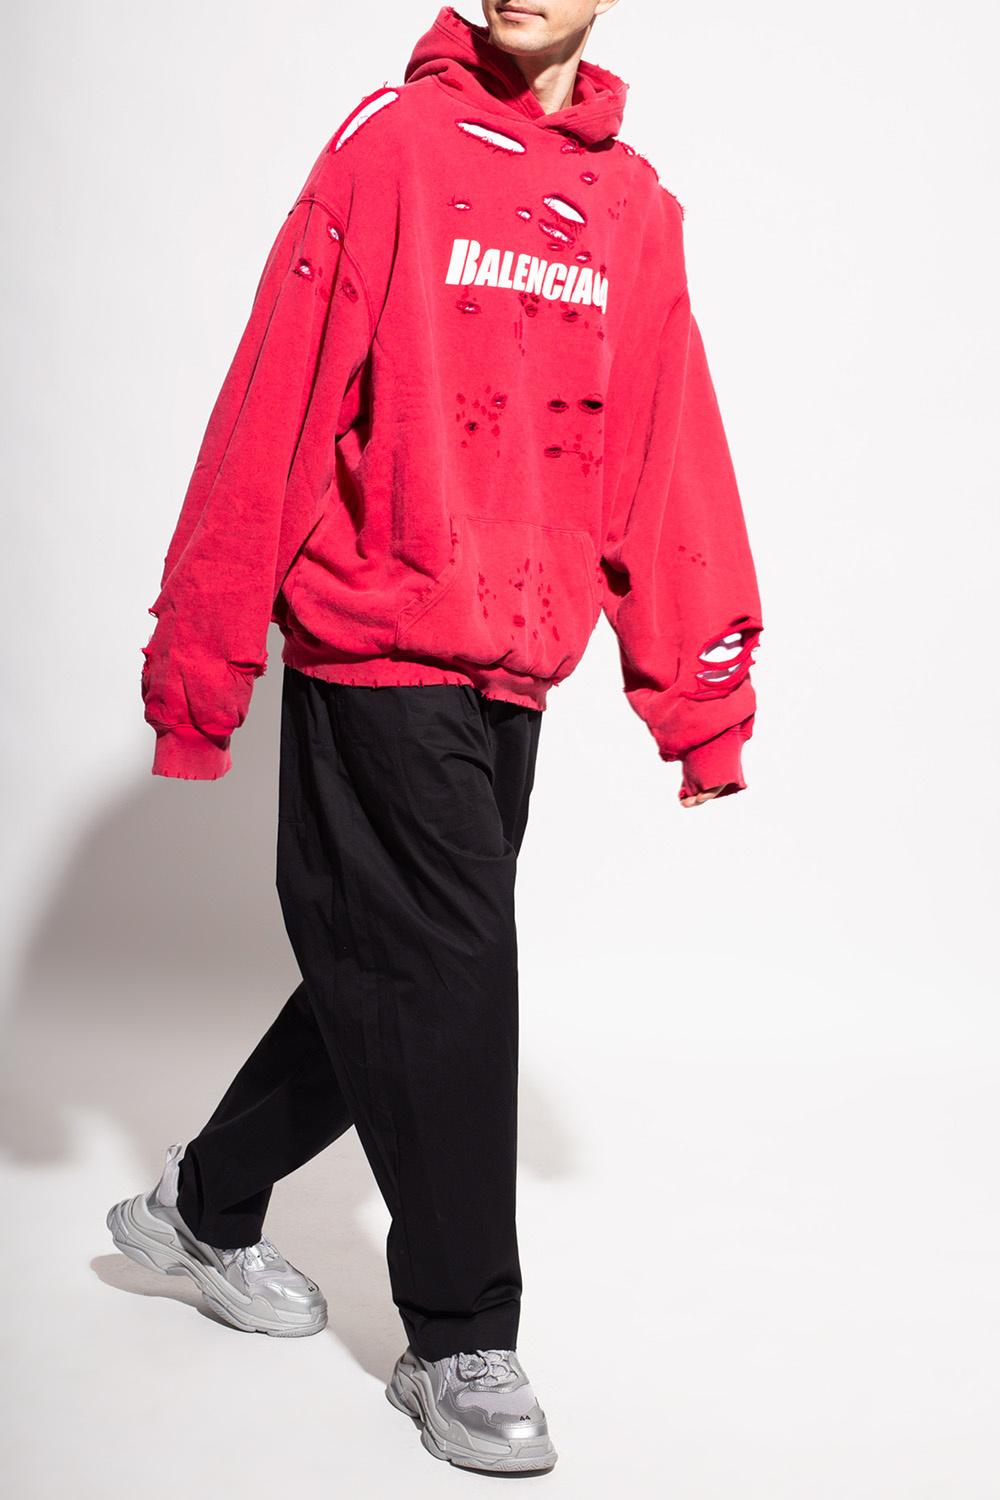 Balenciaga Cotton Sweatshirt With Holes in Red for Men - Lyst